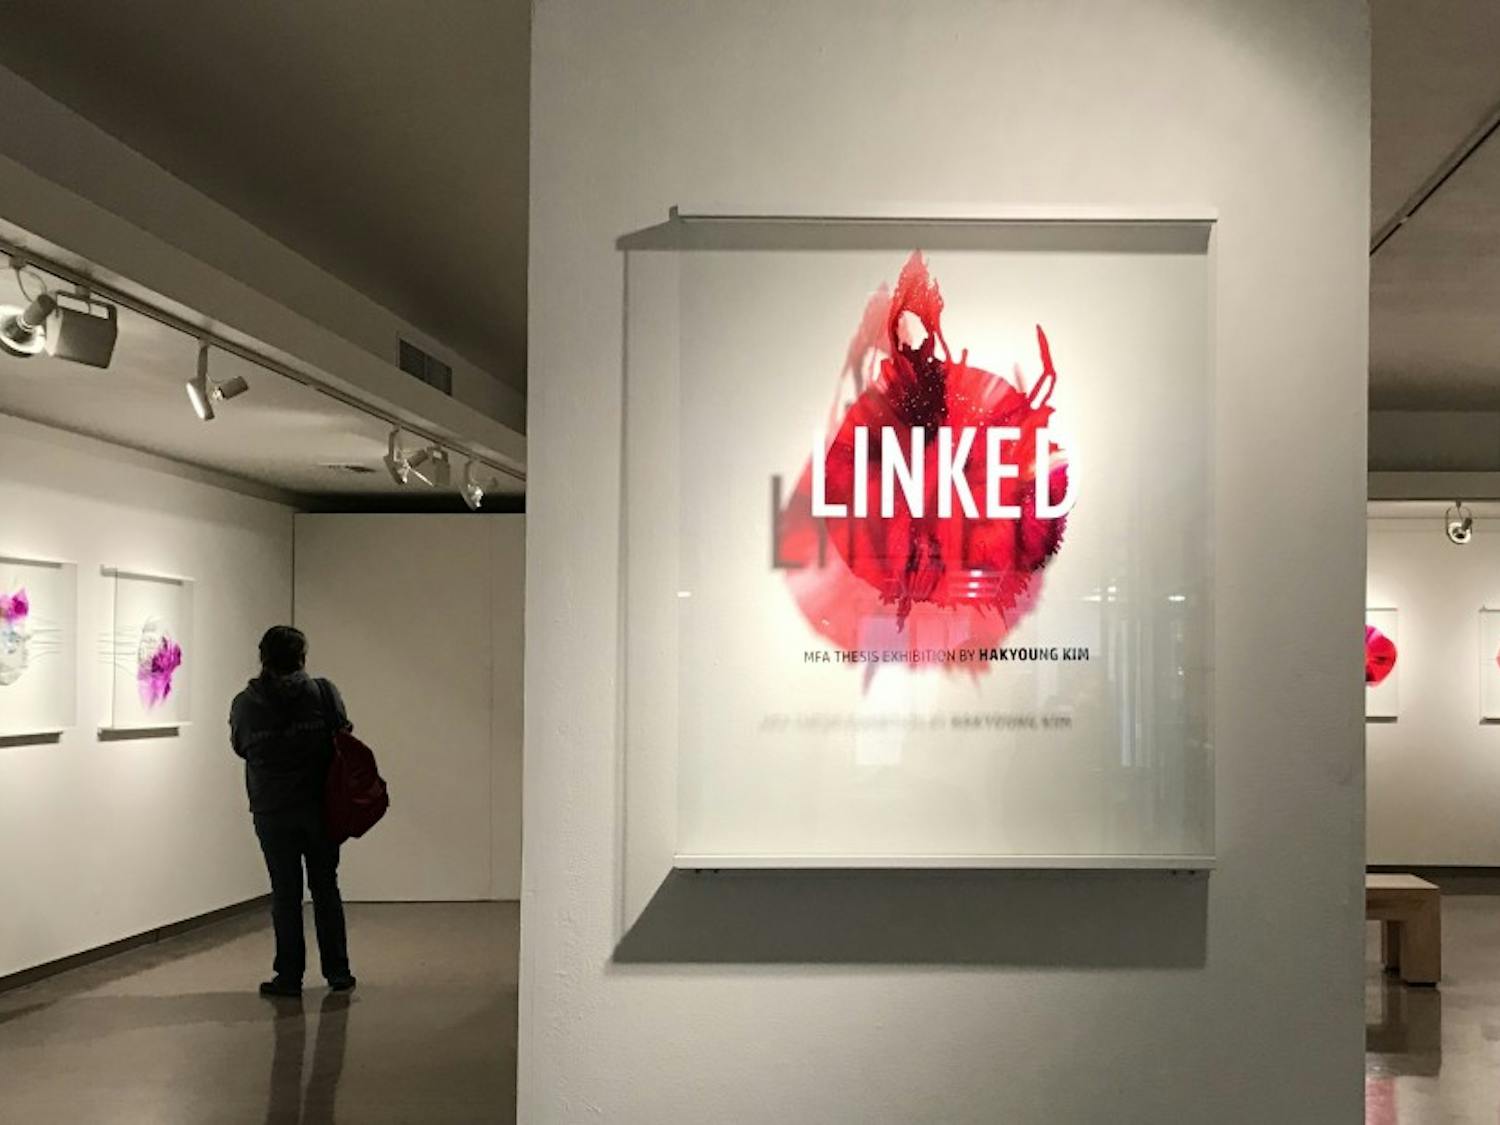 Hakyoung Kim's "Linked" exhibition at the Harry Wood Gallery on Monday, Feb. 27, 2017.